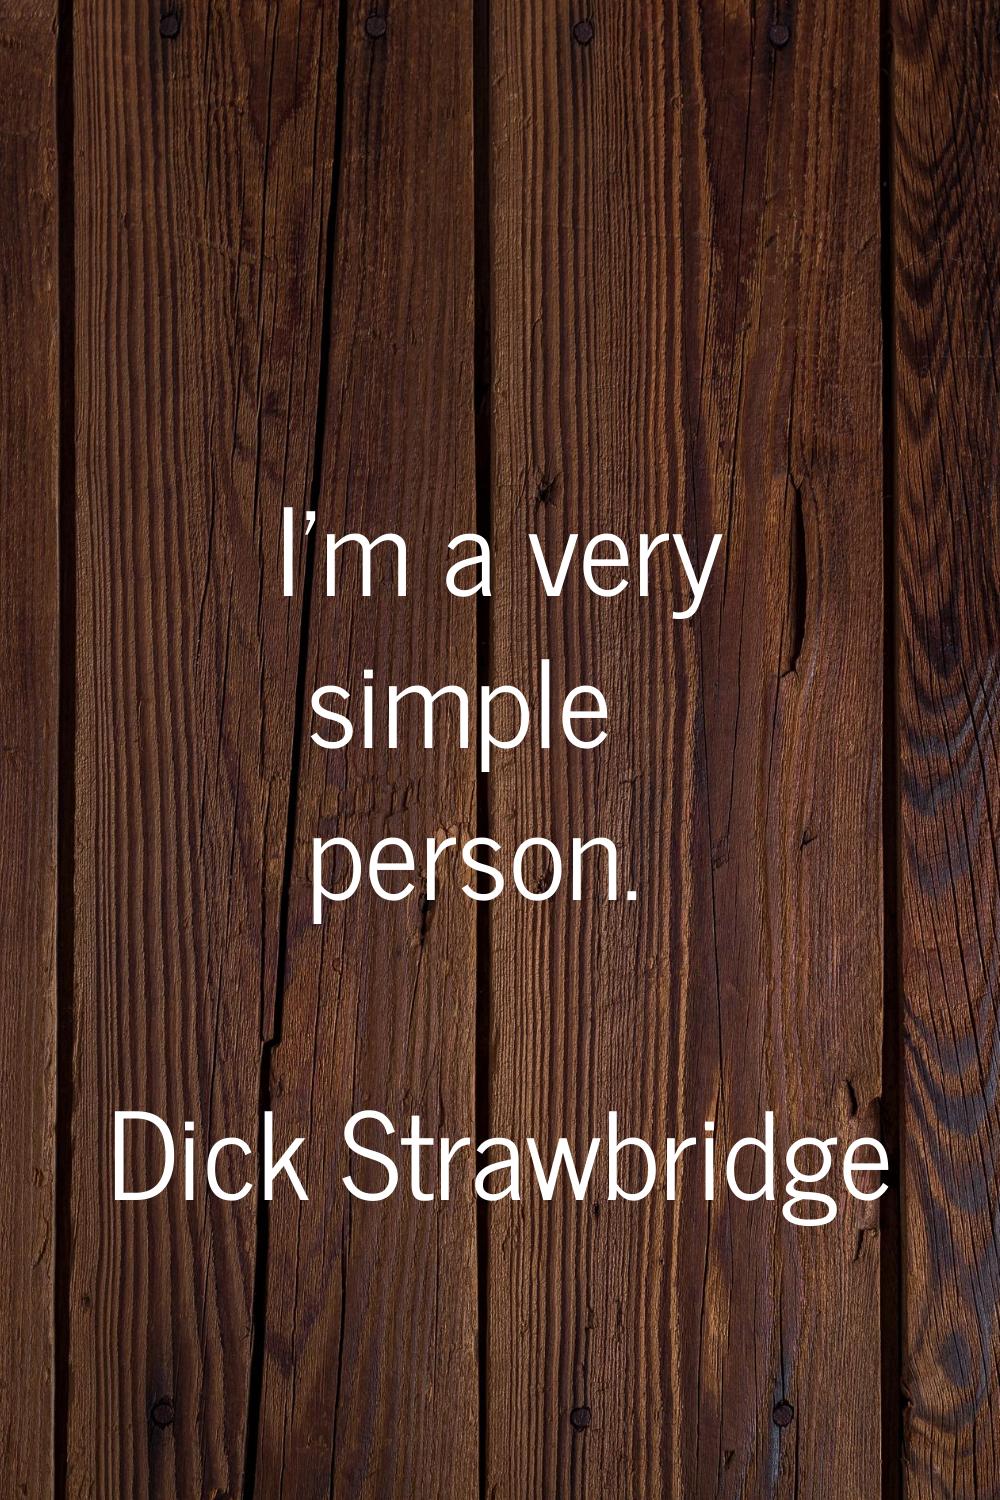 I'm a very simple person.